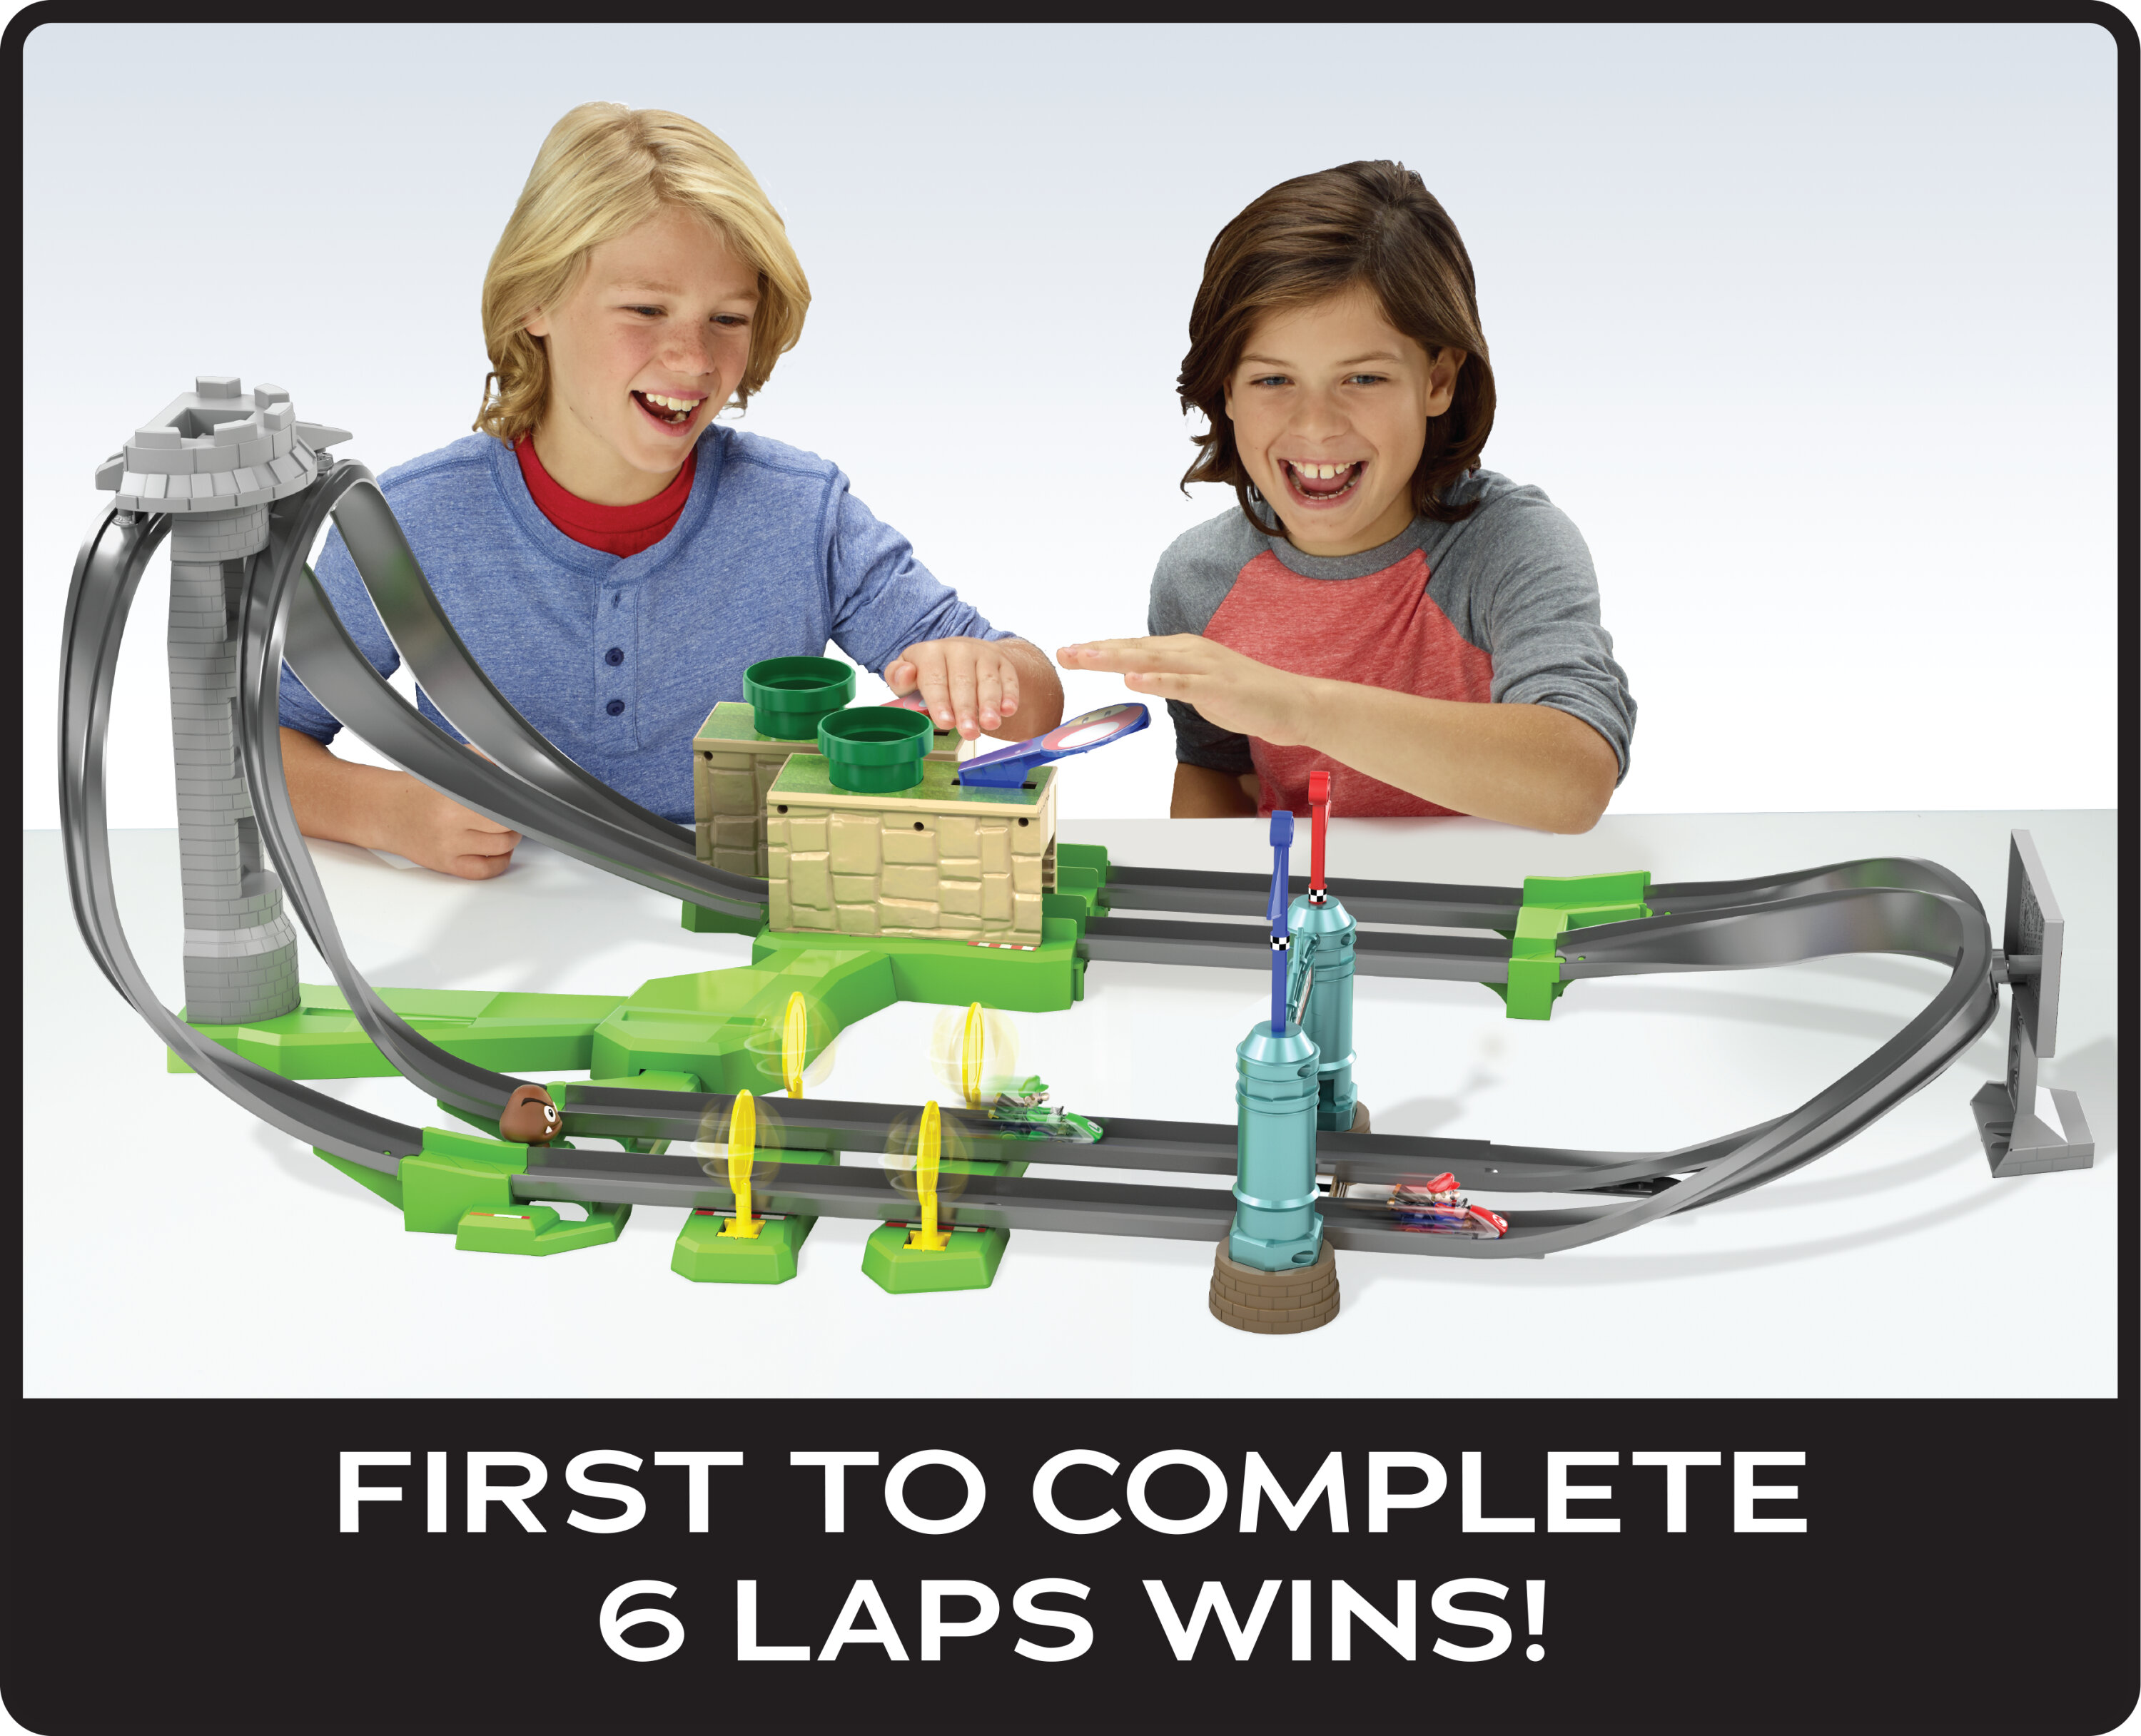 Hot Wheels Mario Kart Circuit Lite Track Set with 1:64 Scale Toy Die-Cast Kart Vehicle & Launcher - image 4 of 7